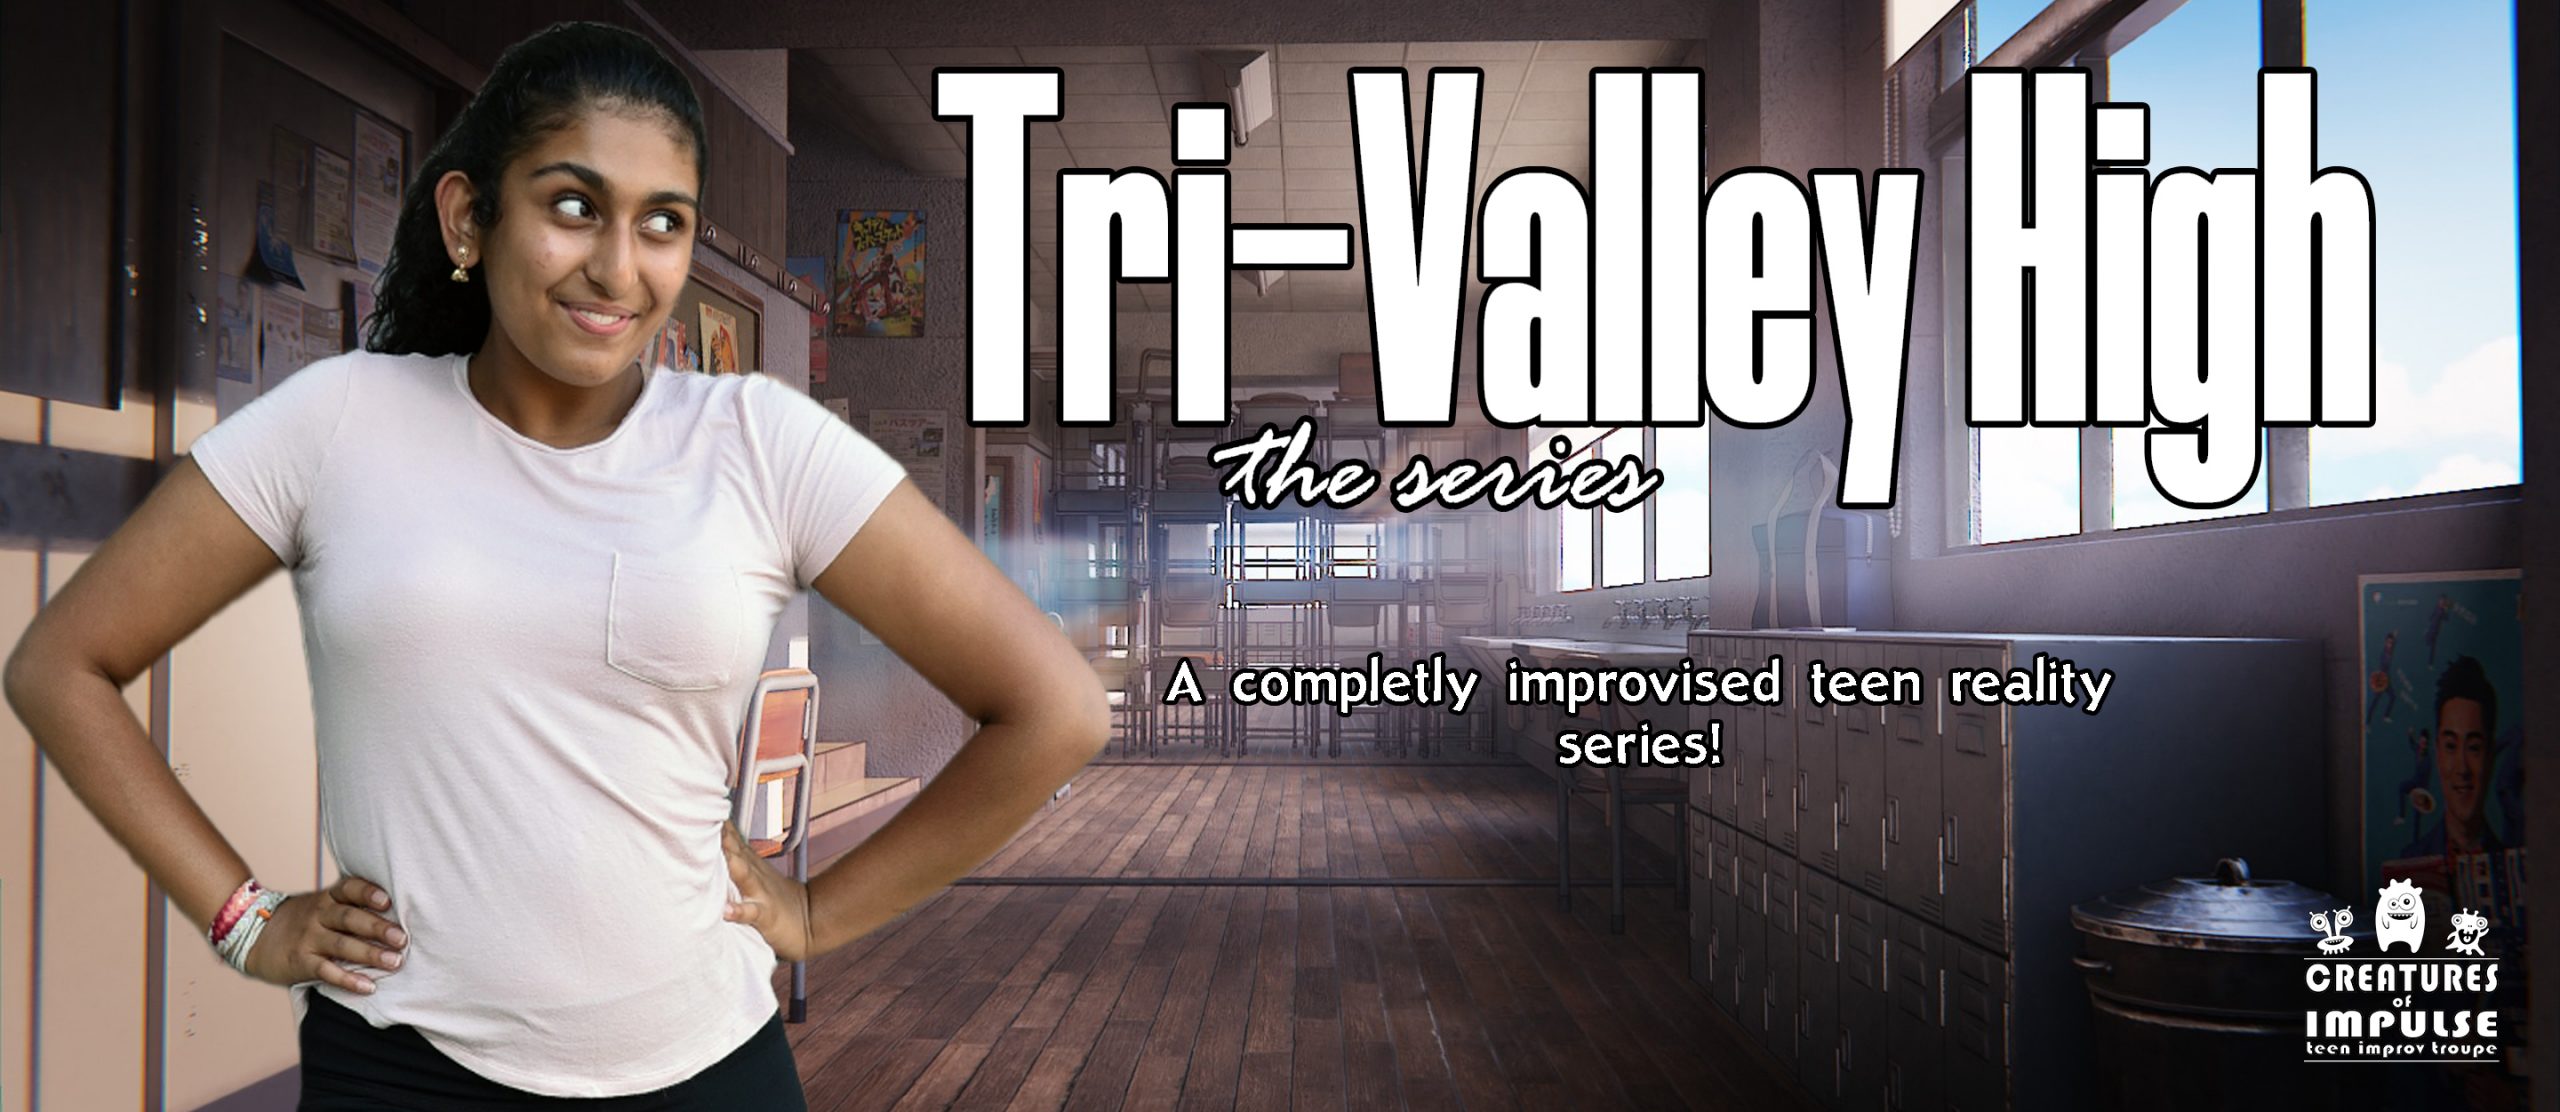 Creatures of Impulse Presents: Tri-Valley High: The Series!